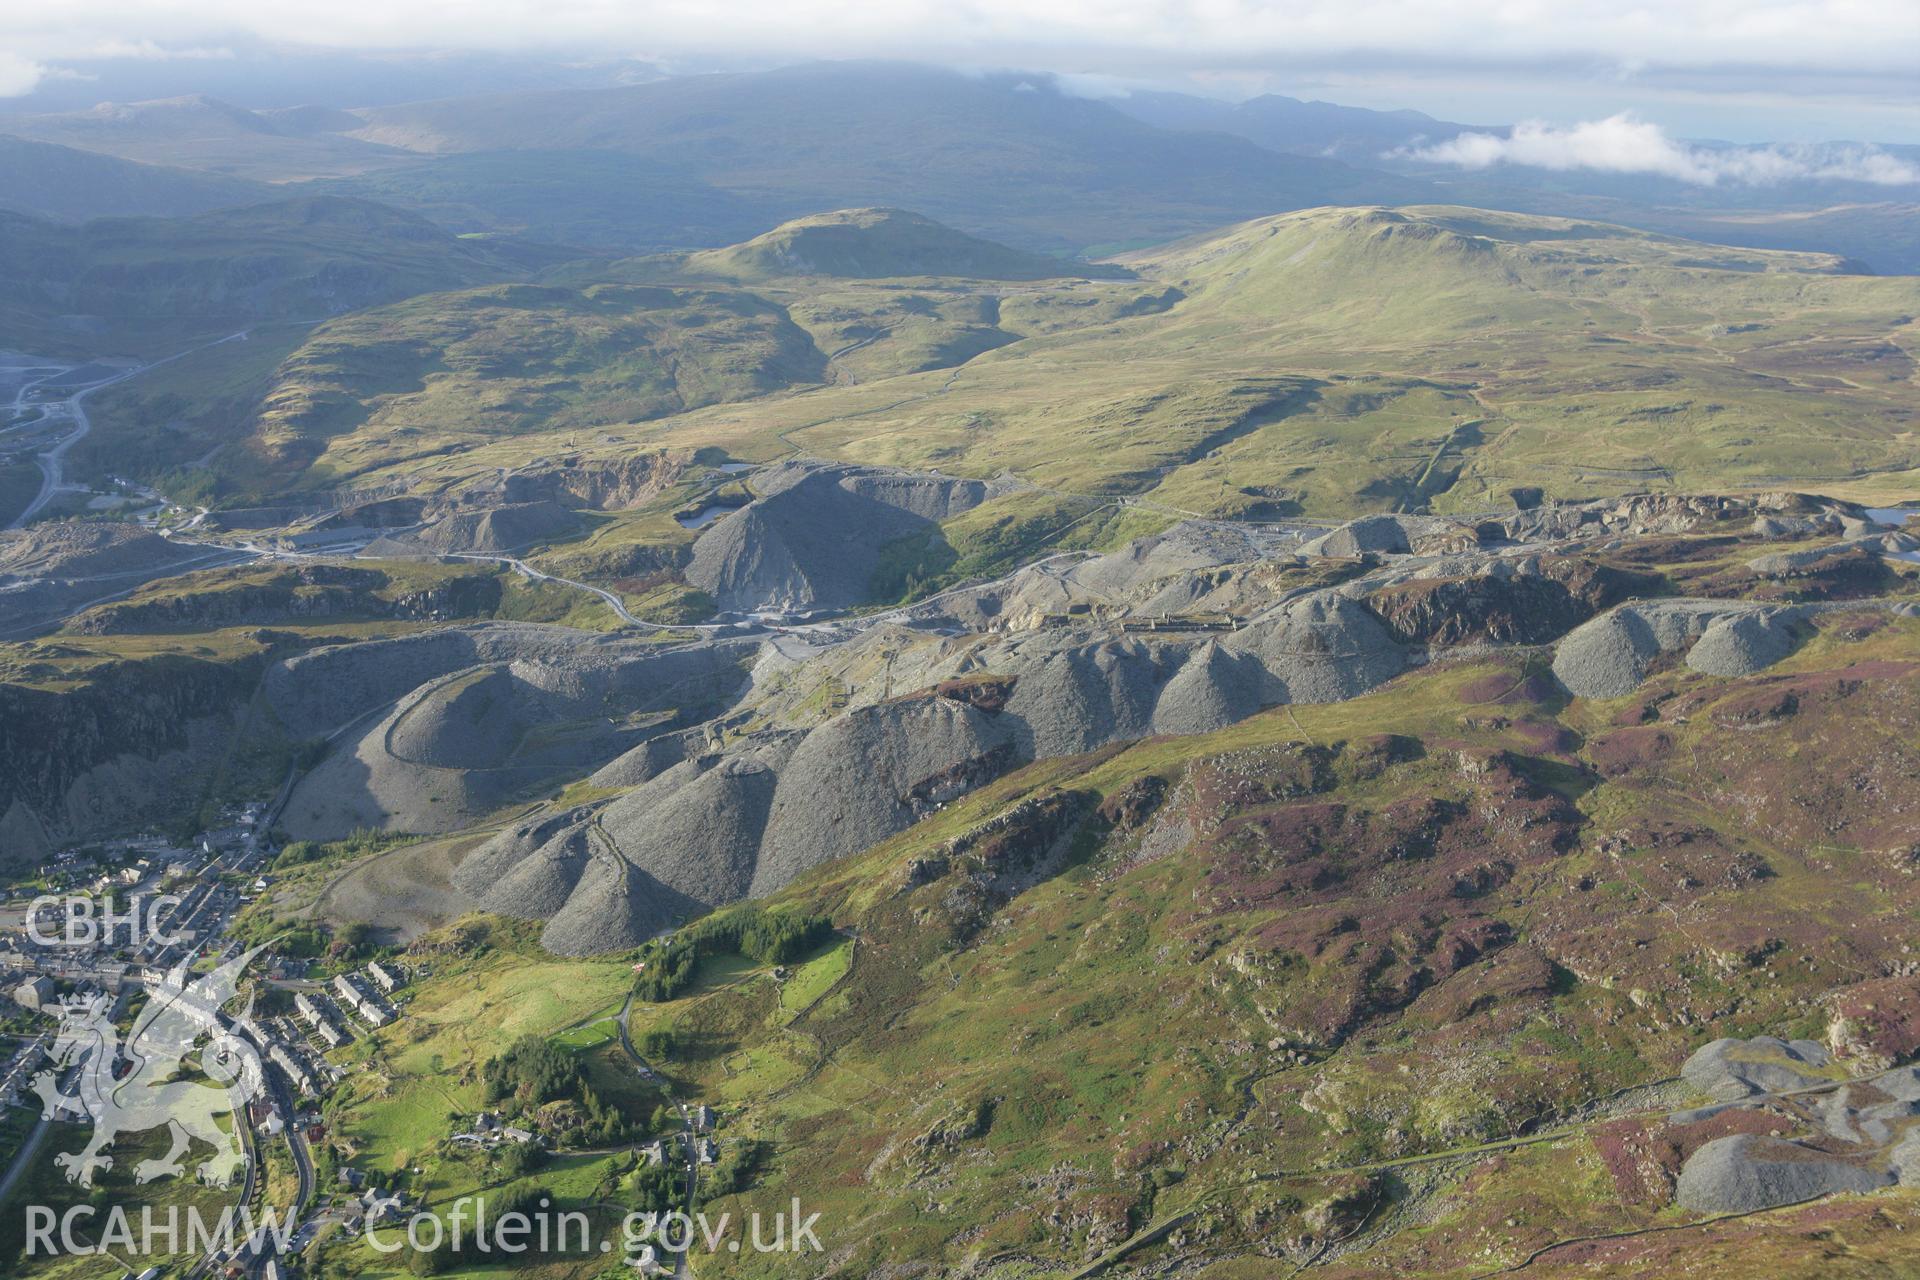 RCAHMW colour oblique aerial photograph of Blaenau Ffestiniog from the south showing the quarries. Taken on 06 September 2007 by Toby Driver